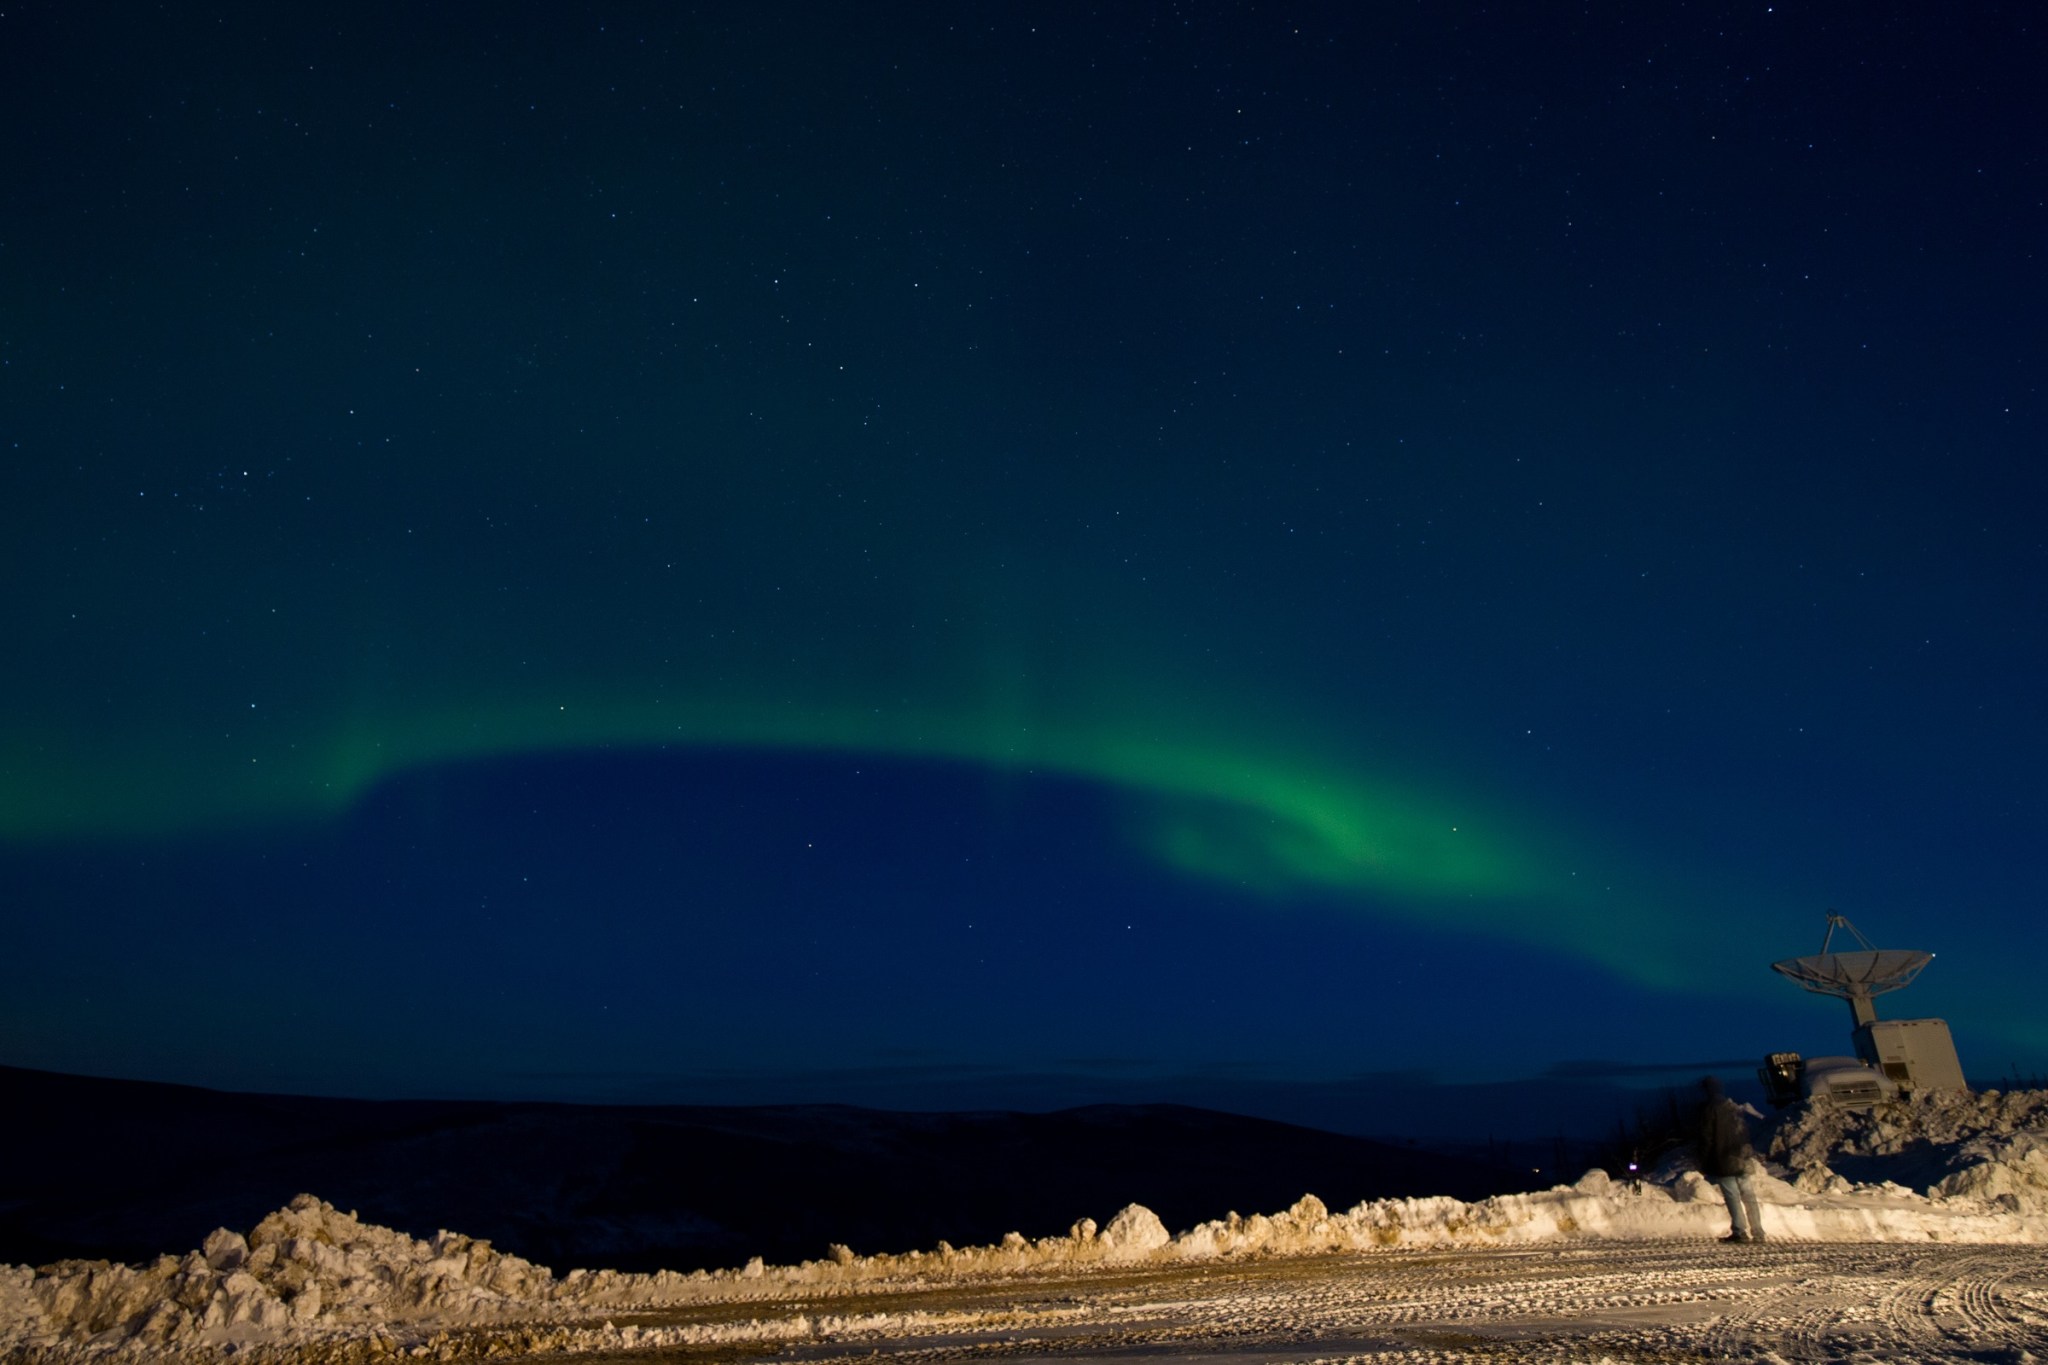 A thin green streak of aurora move across a dark blue sky, with a blanket of snow in the foreground.